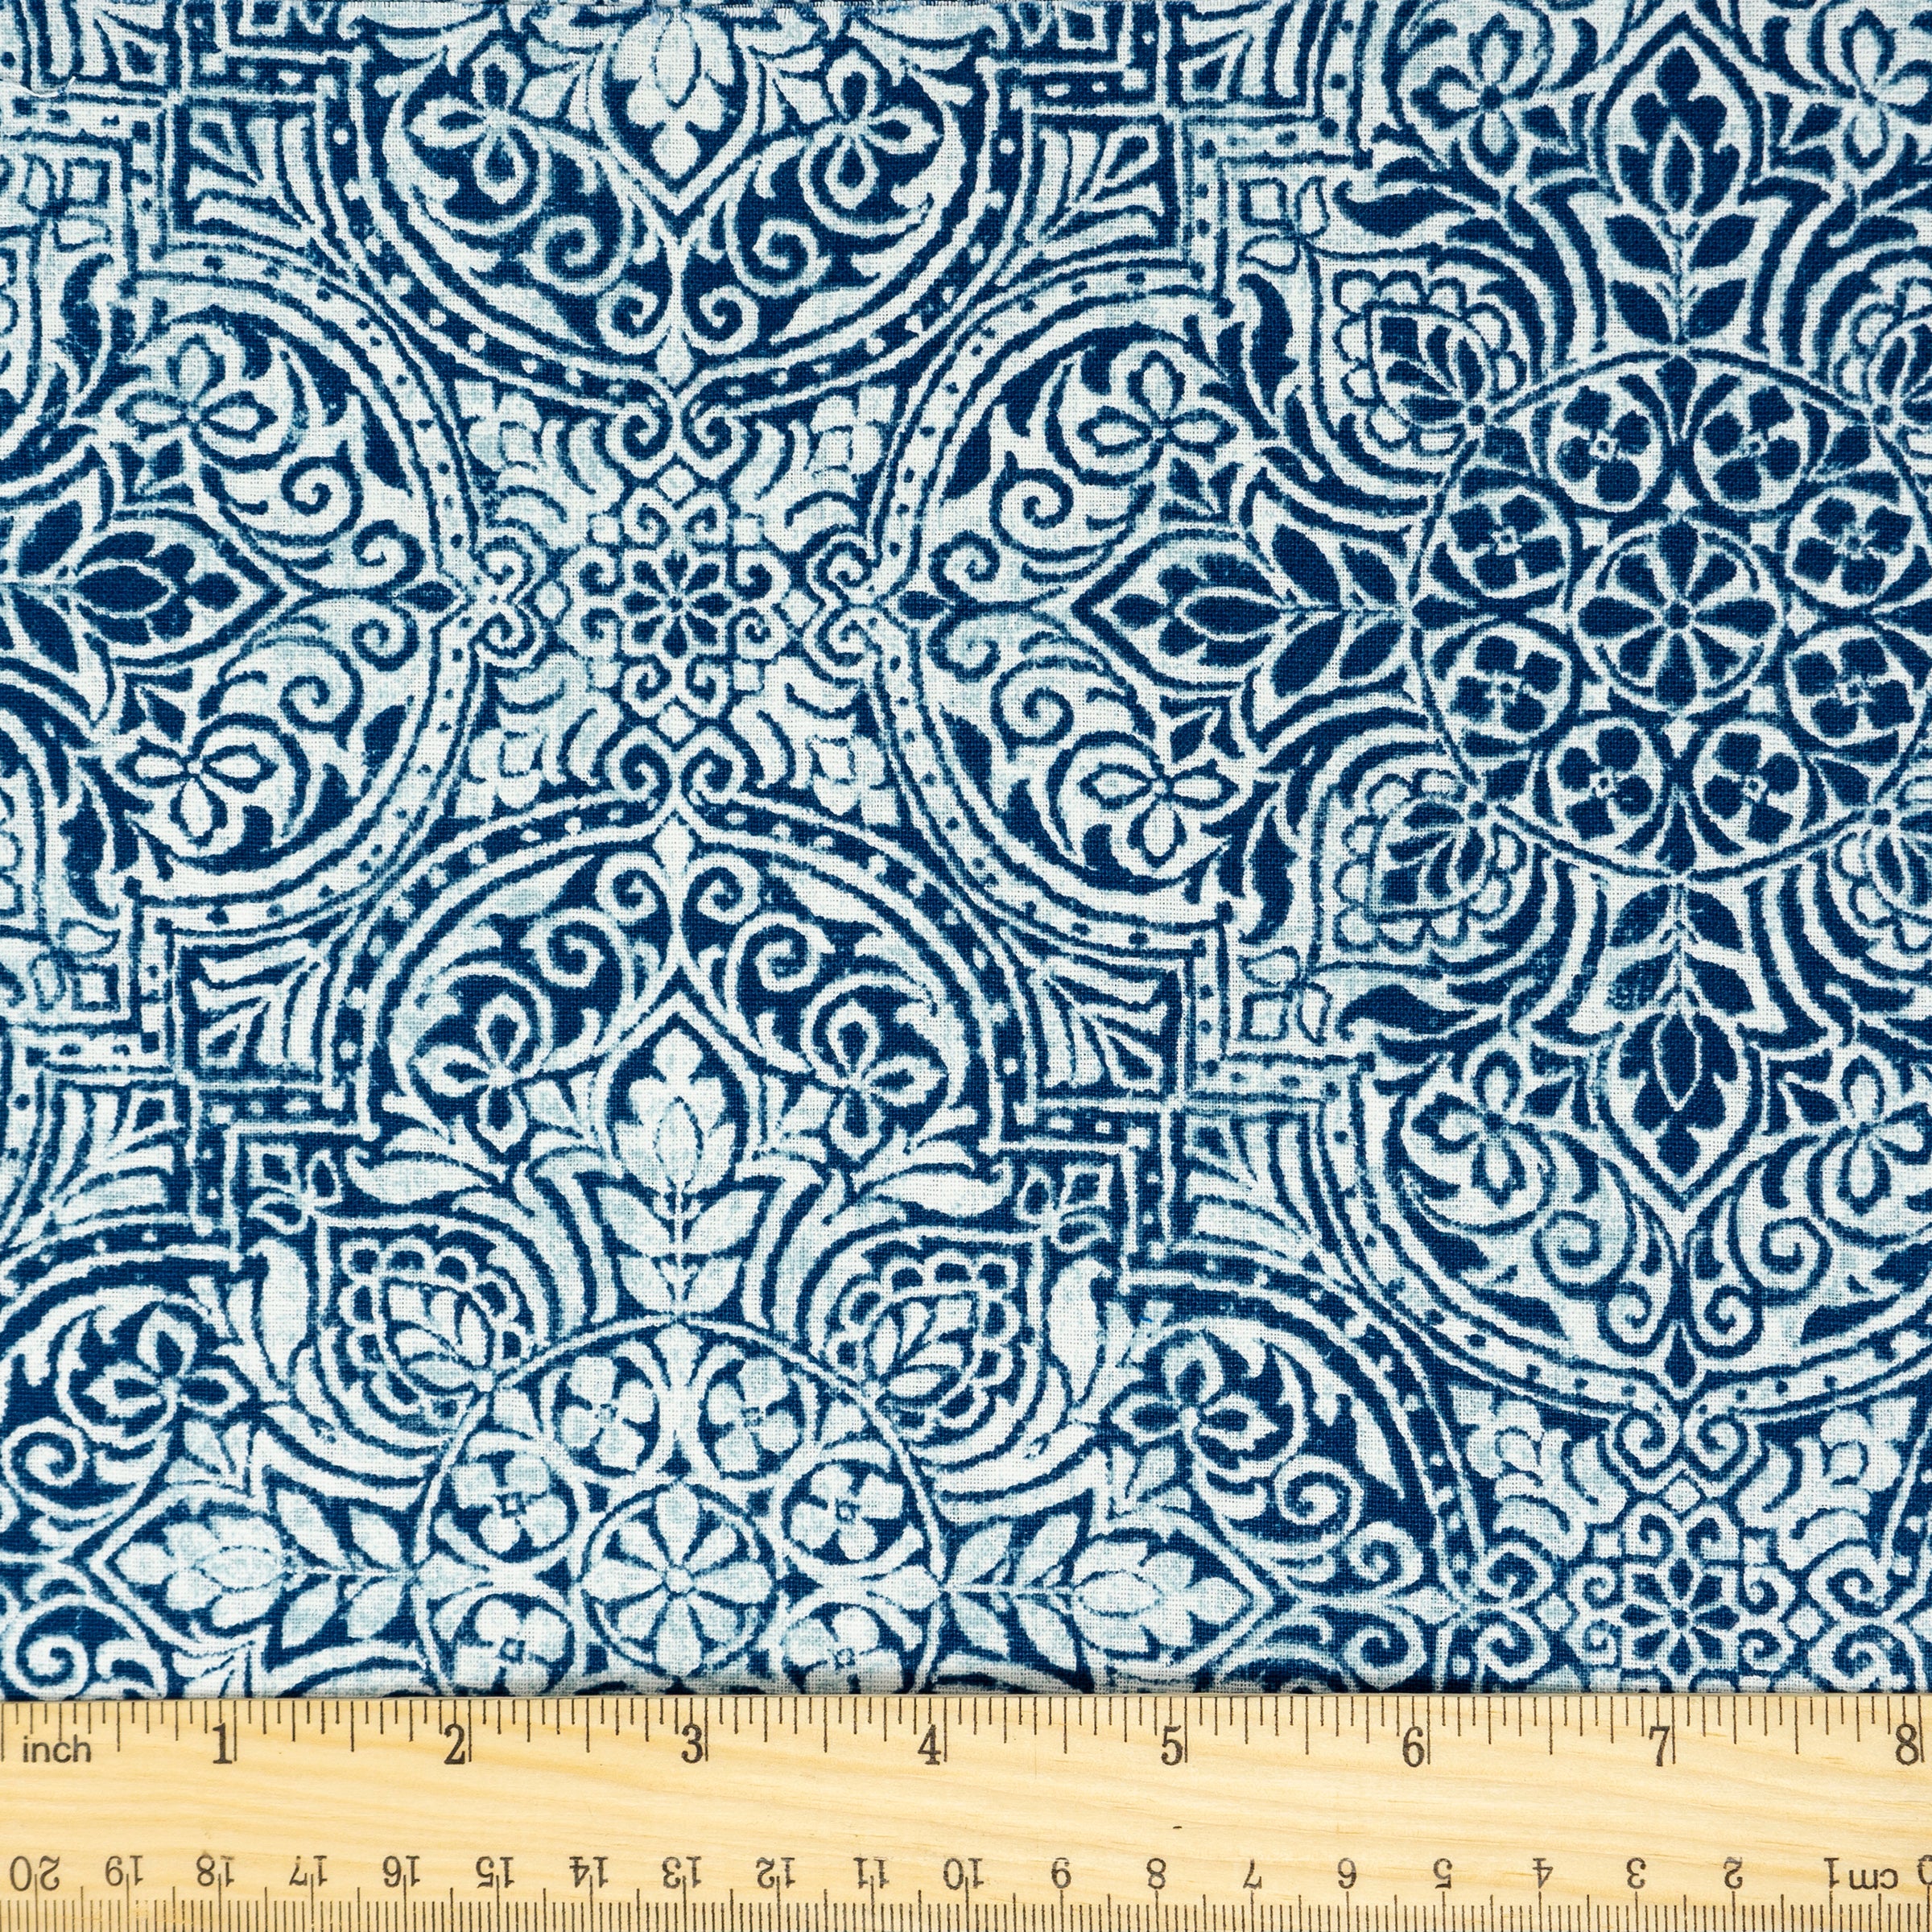 Waverly Inspirations 44" 100% Cotton Global Medallion Sewing & Craft Fabric By the Yard, Navy